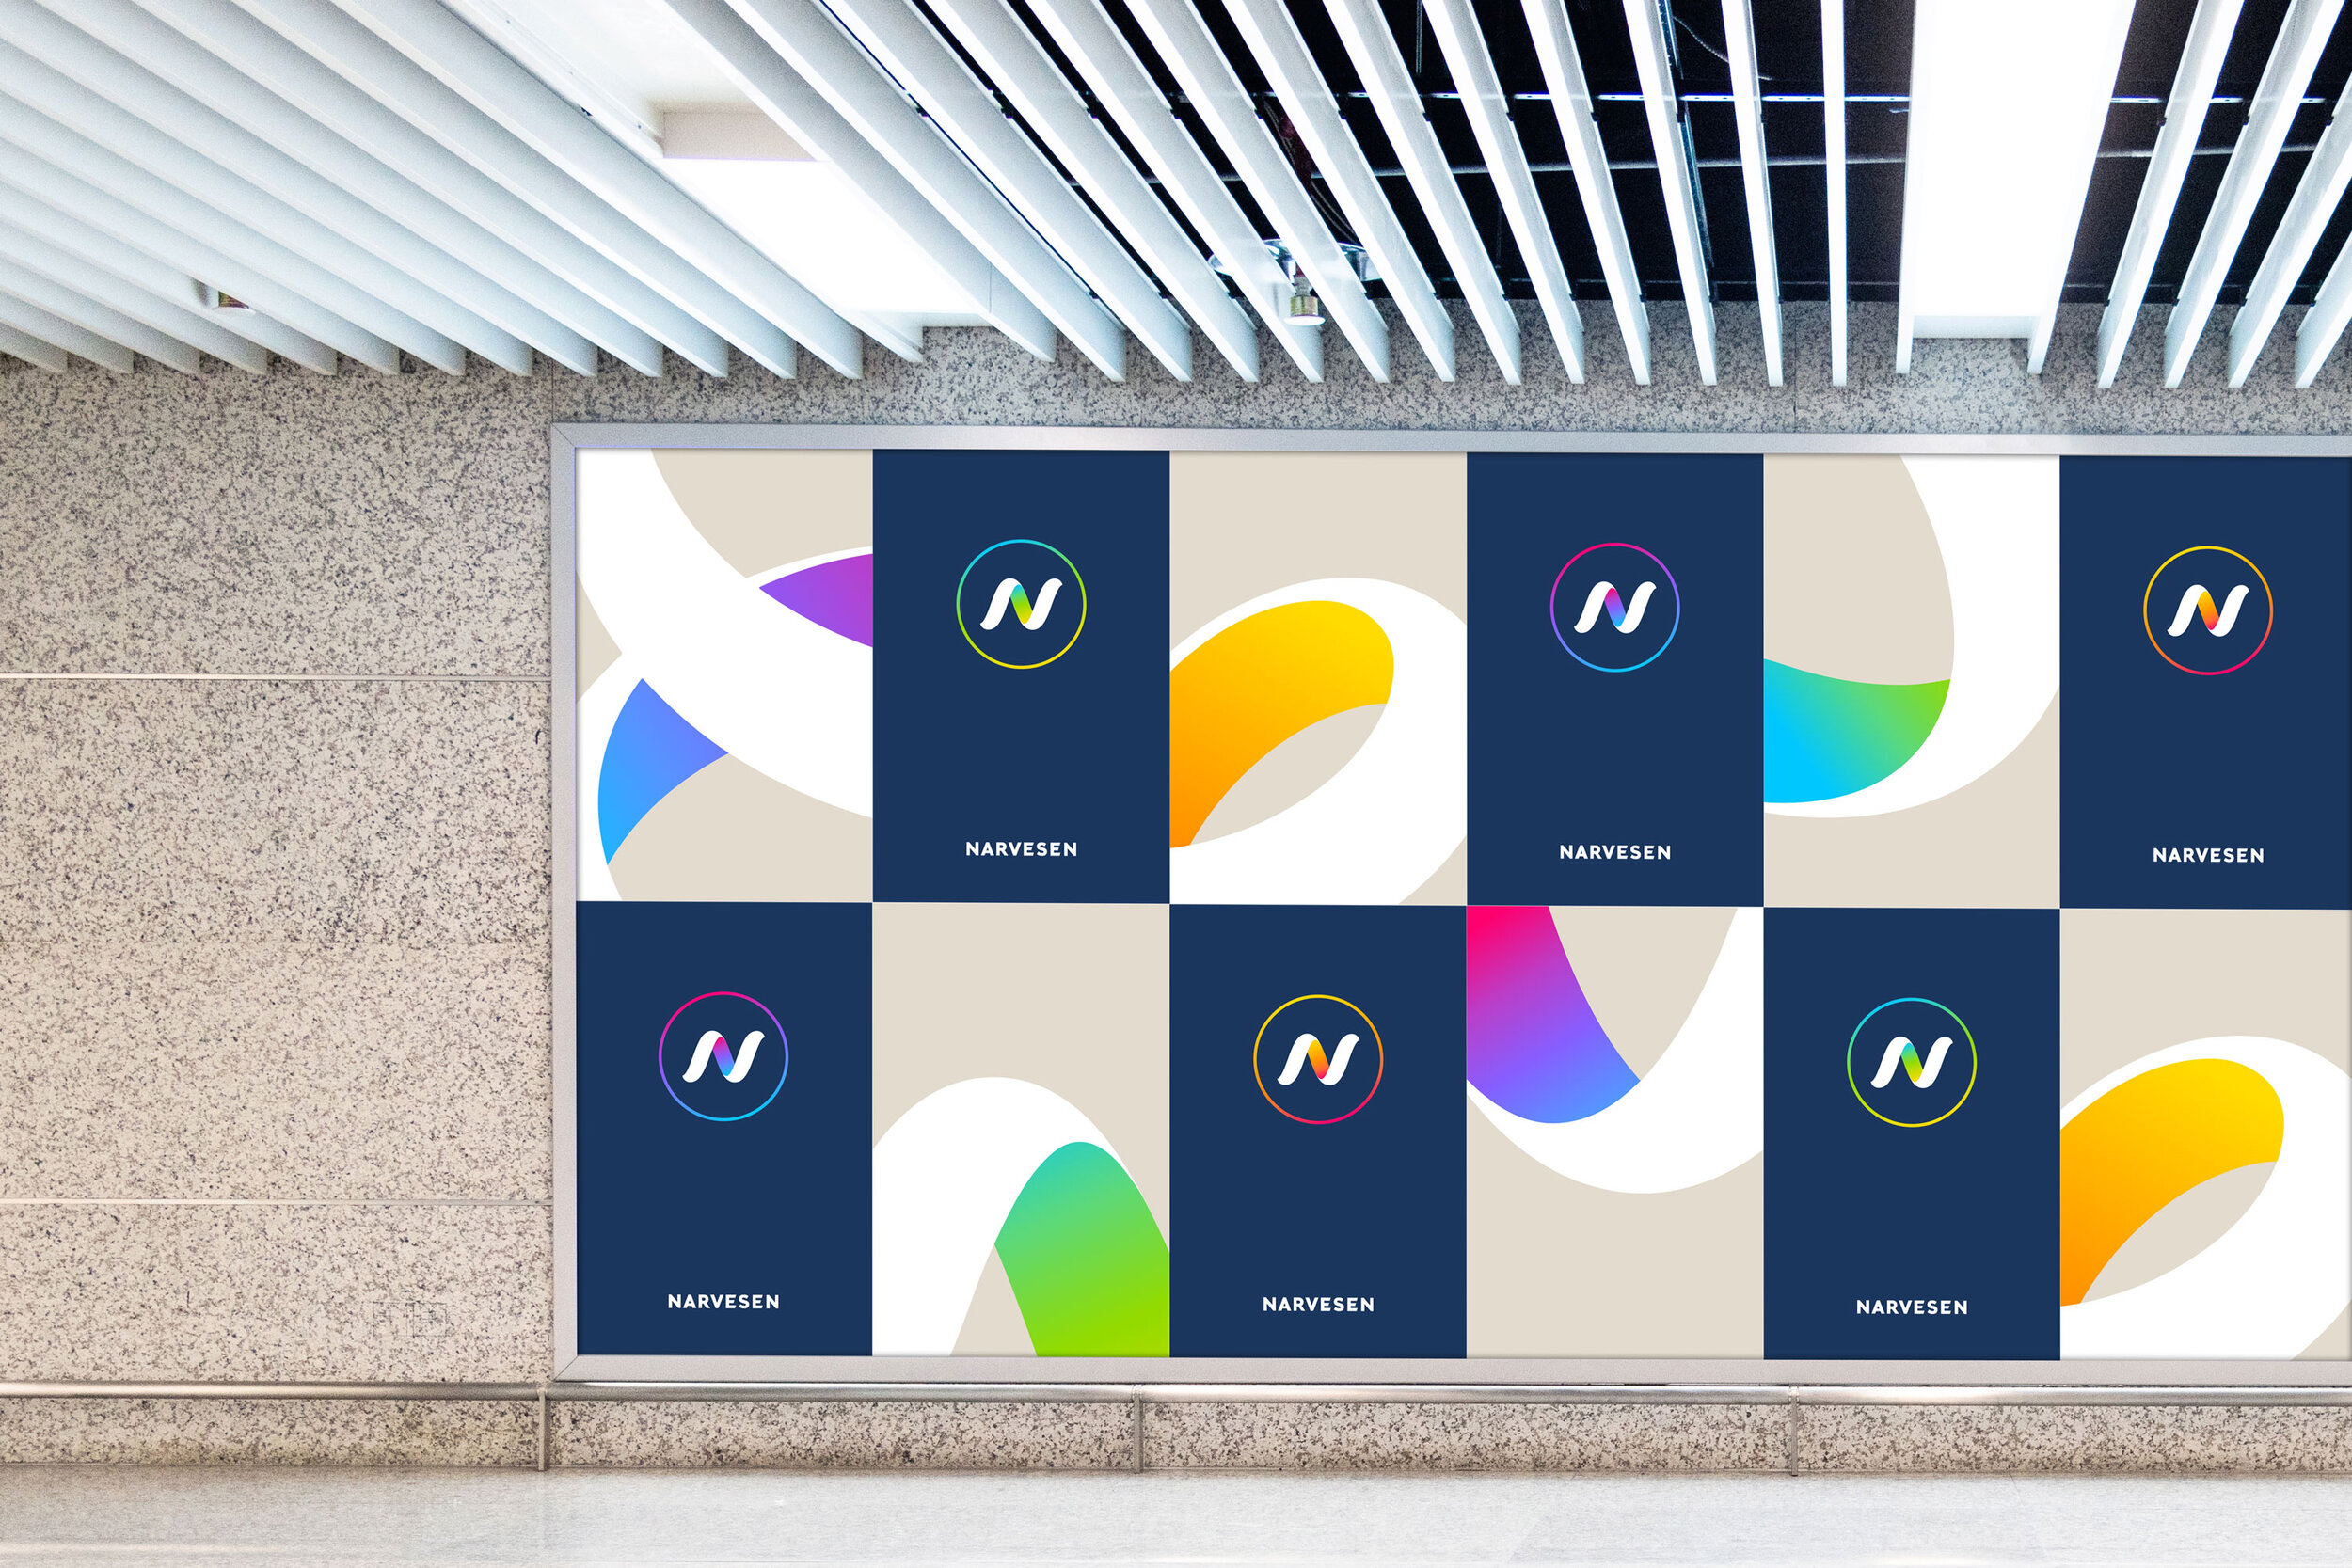 Examples of how Narvesen can use the logo designed by the design agency Mission in several ways. Here as posts with typography.